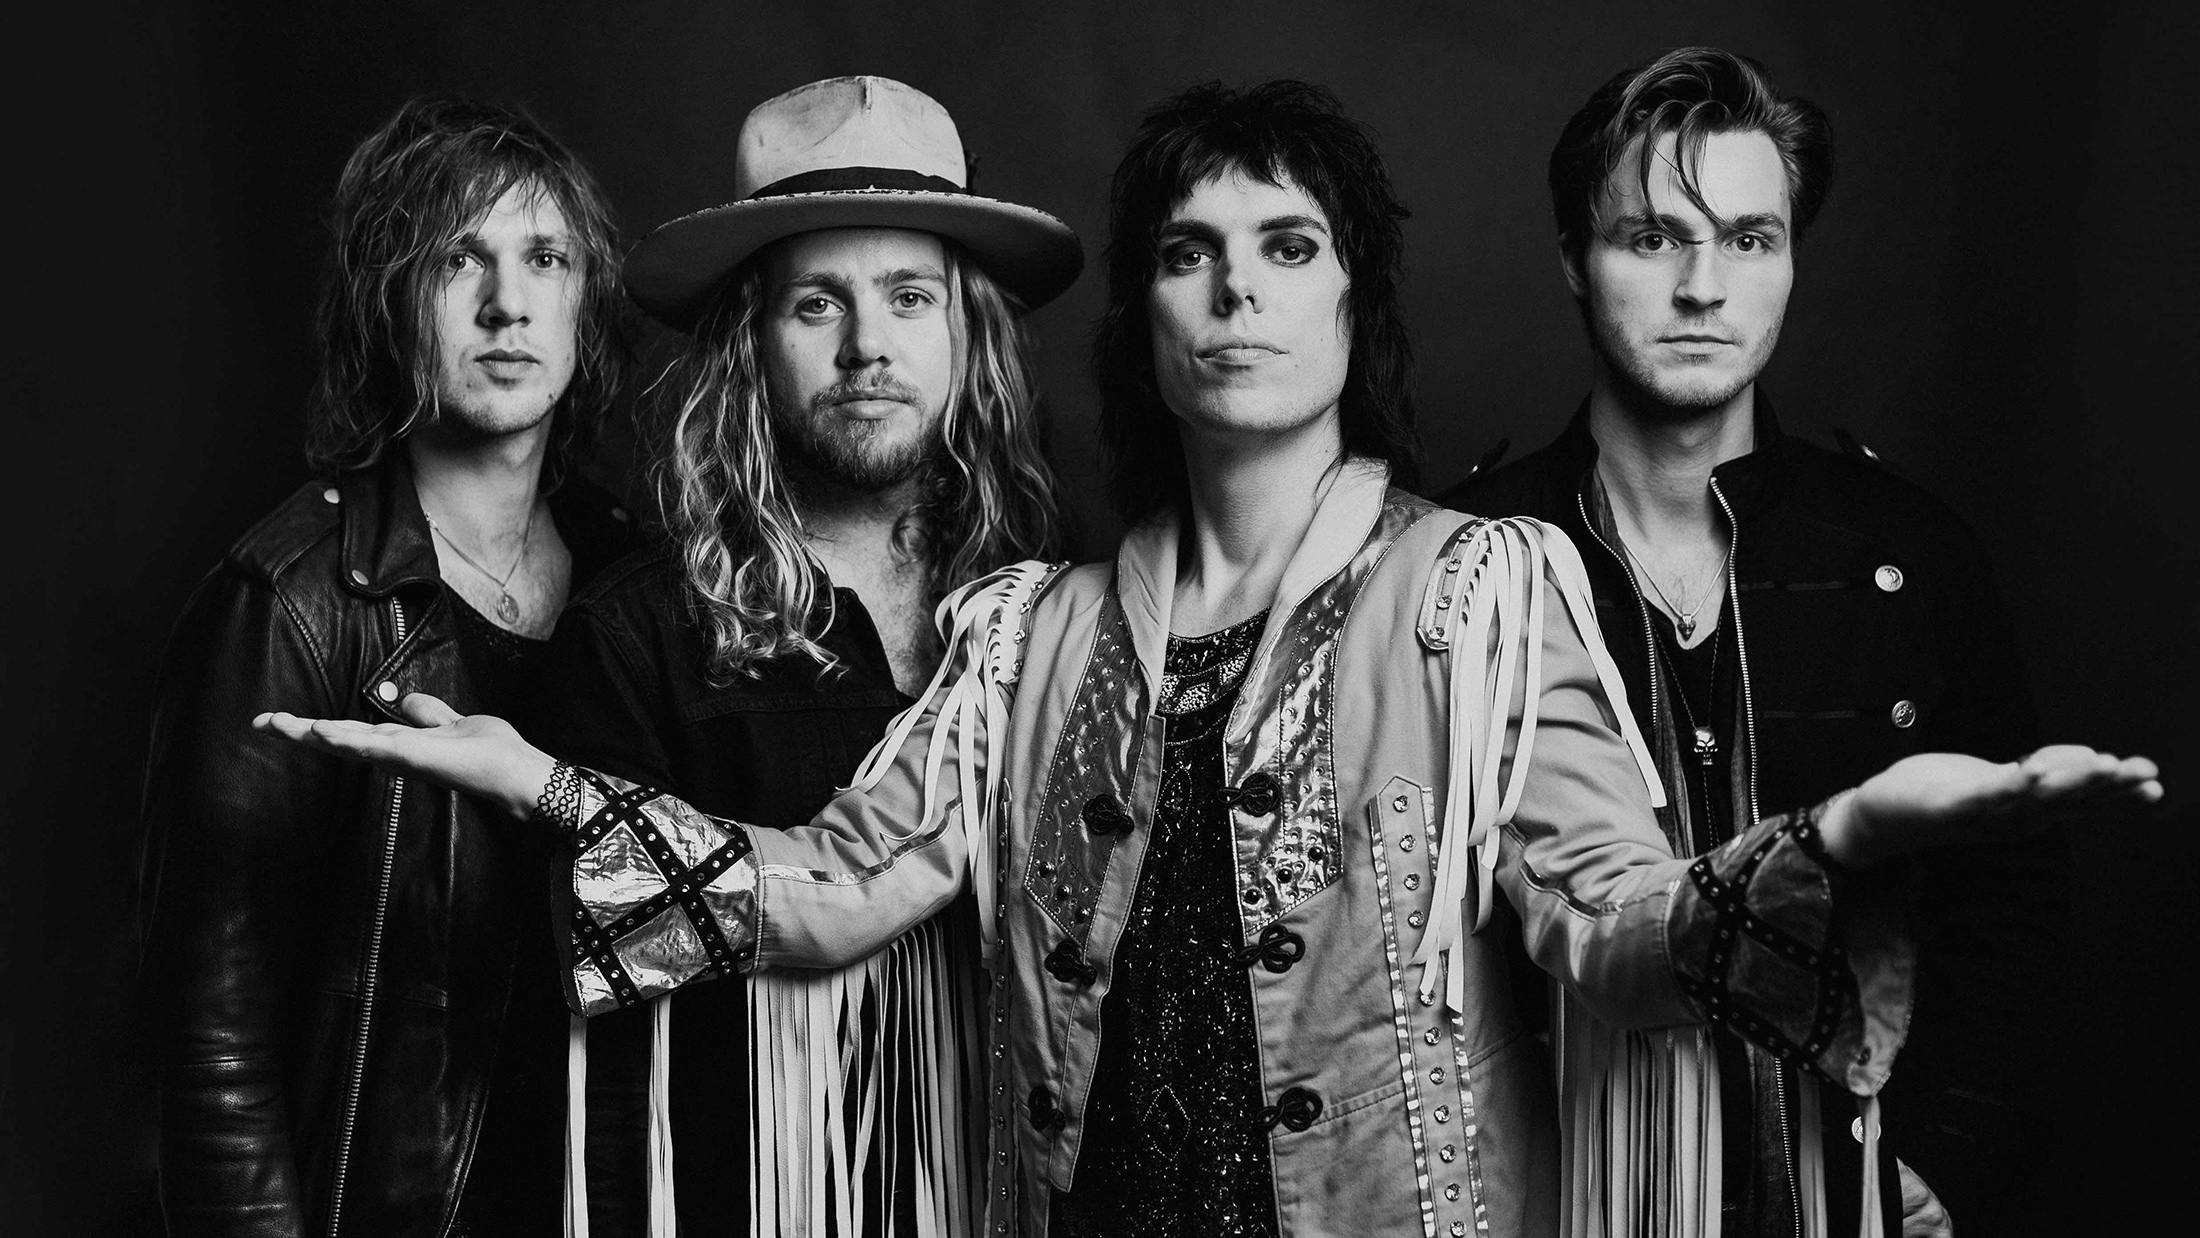 Exclusive! The Struts Storm Vegas In Blinging New Video!